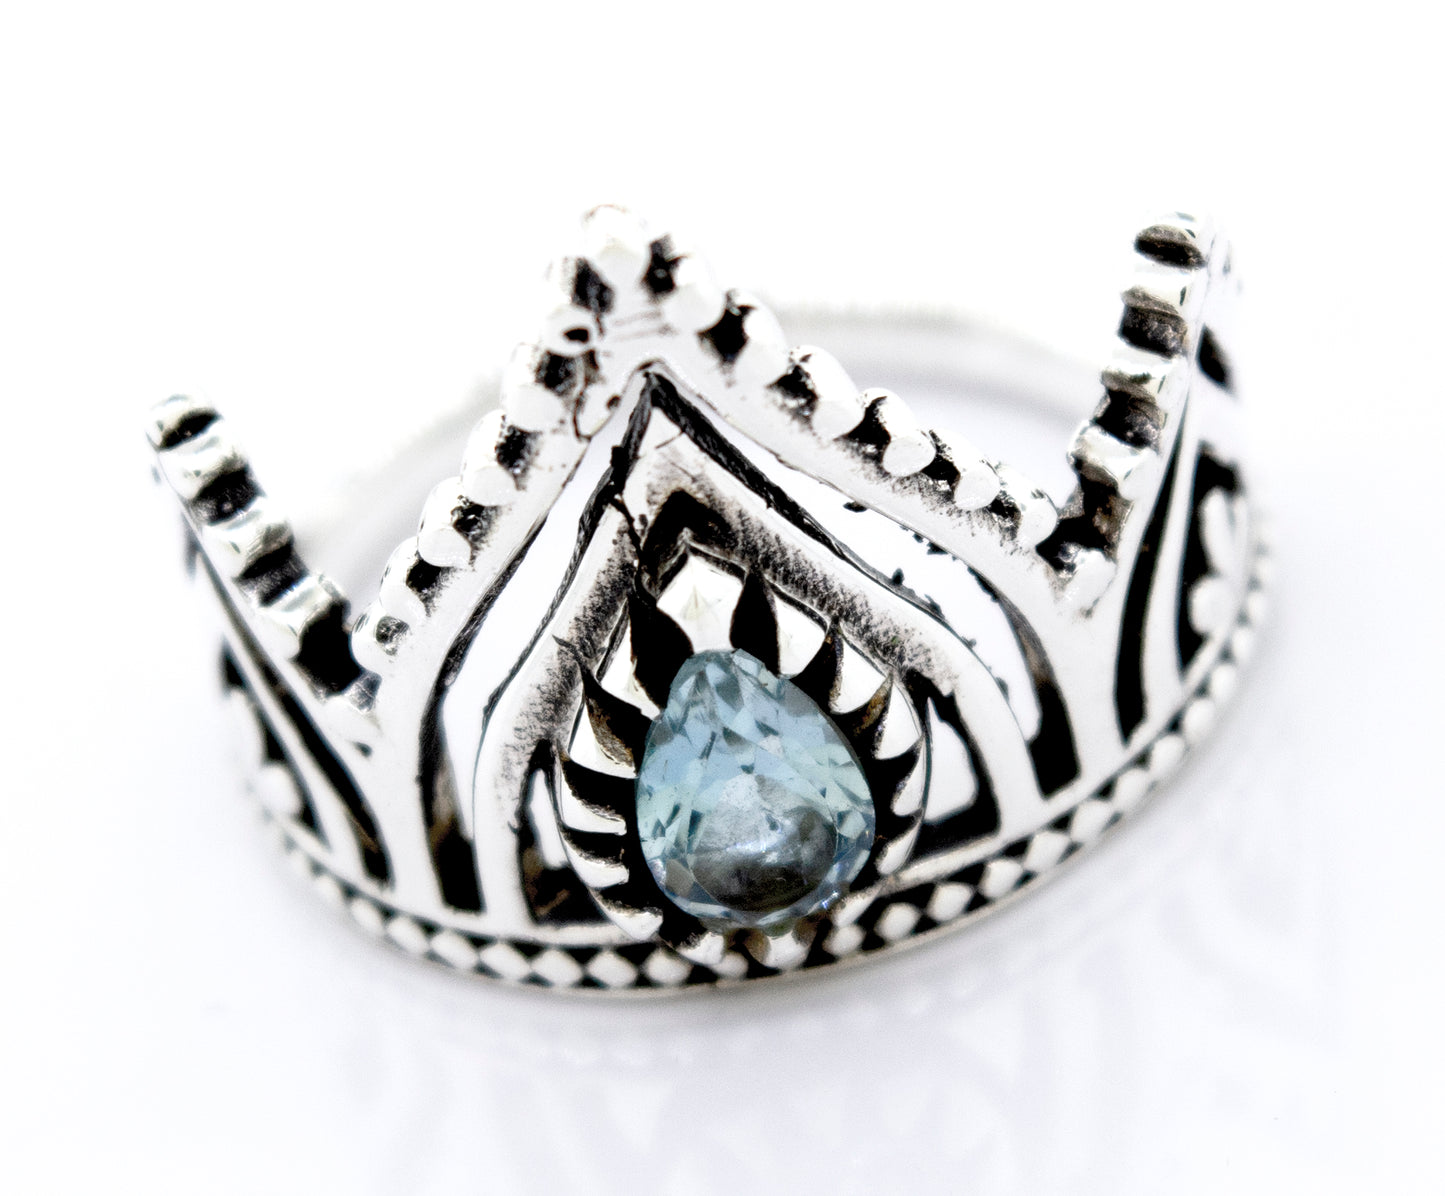 A Super Silver Sterling Silver Crown Ring with a Teardrop Shape Blue Topaz stone.